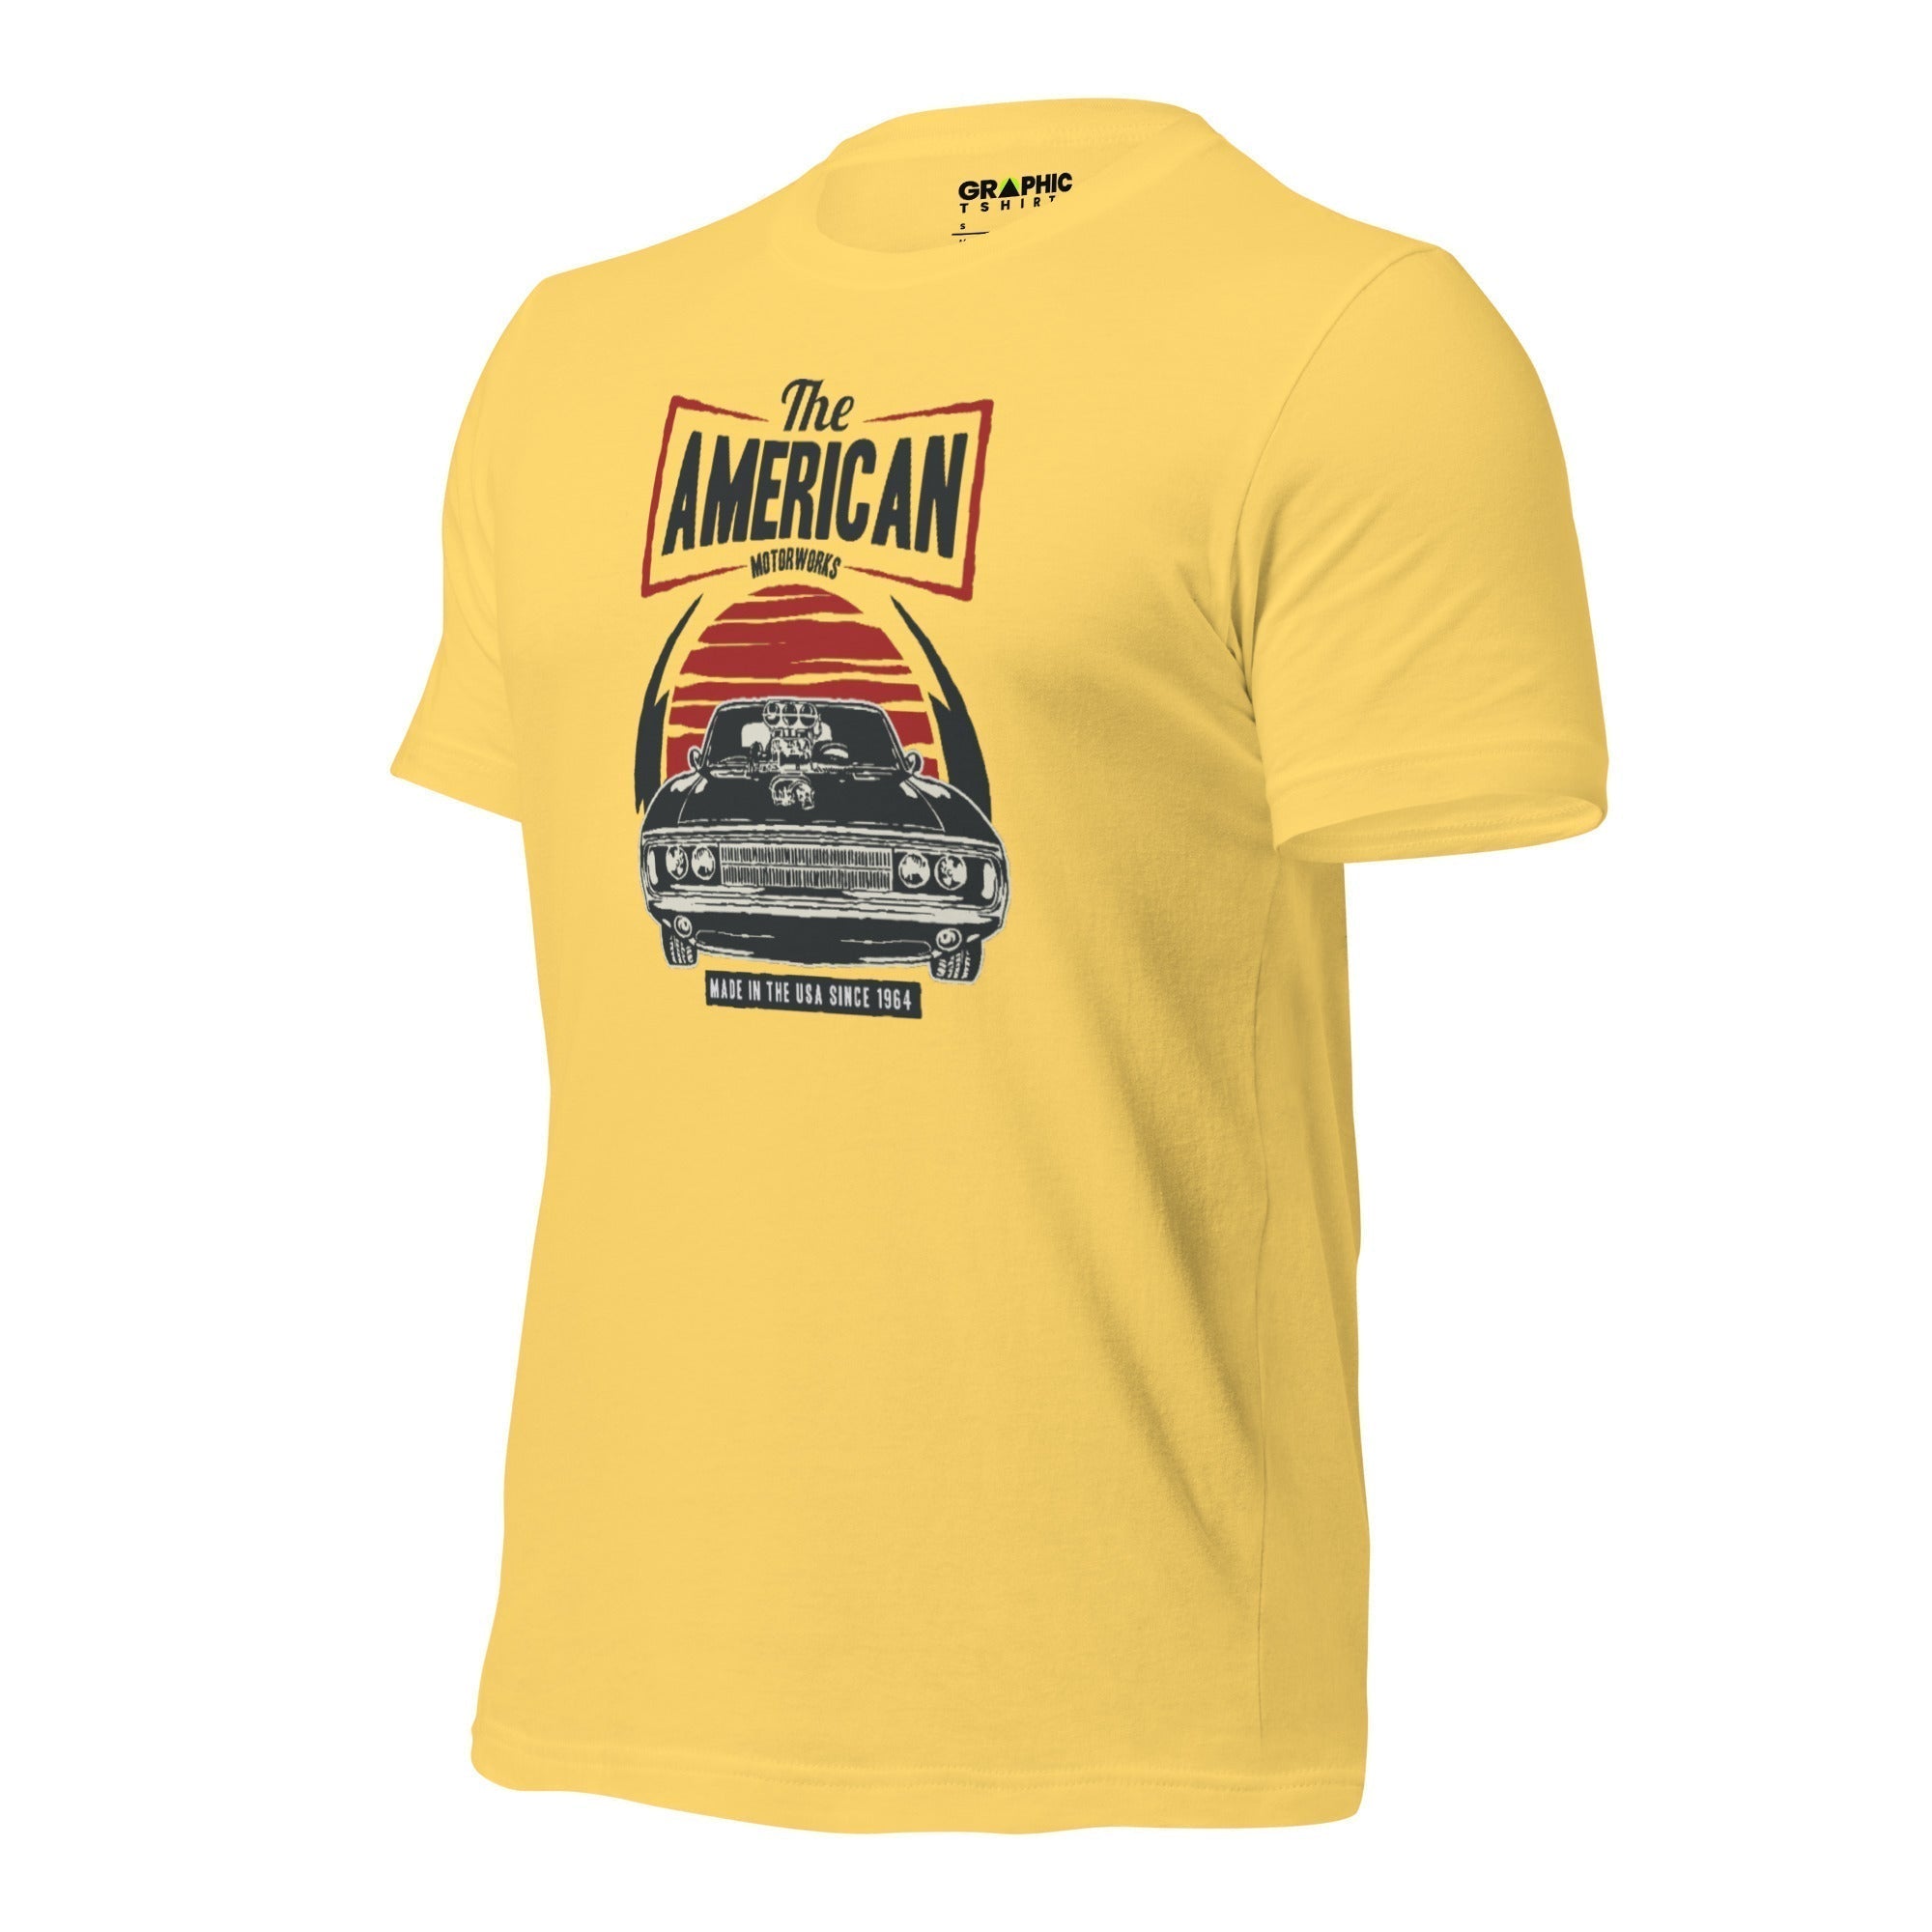 Unisex Staple T-Shirt - The American Motorworks Made In The USA Since 1964 - GRAPHIC T-SHIRTS